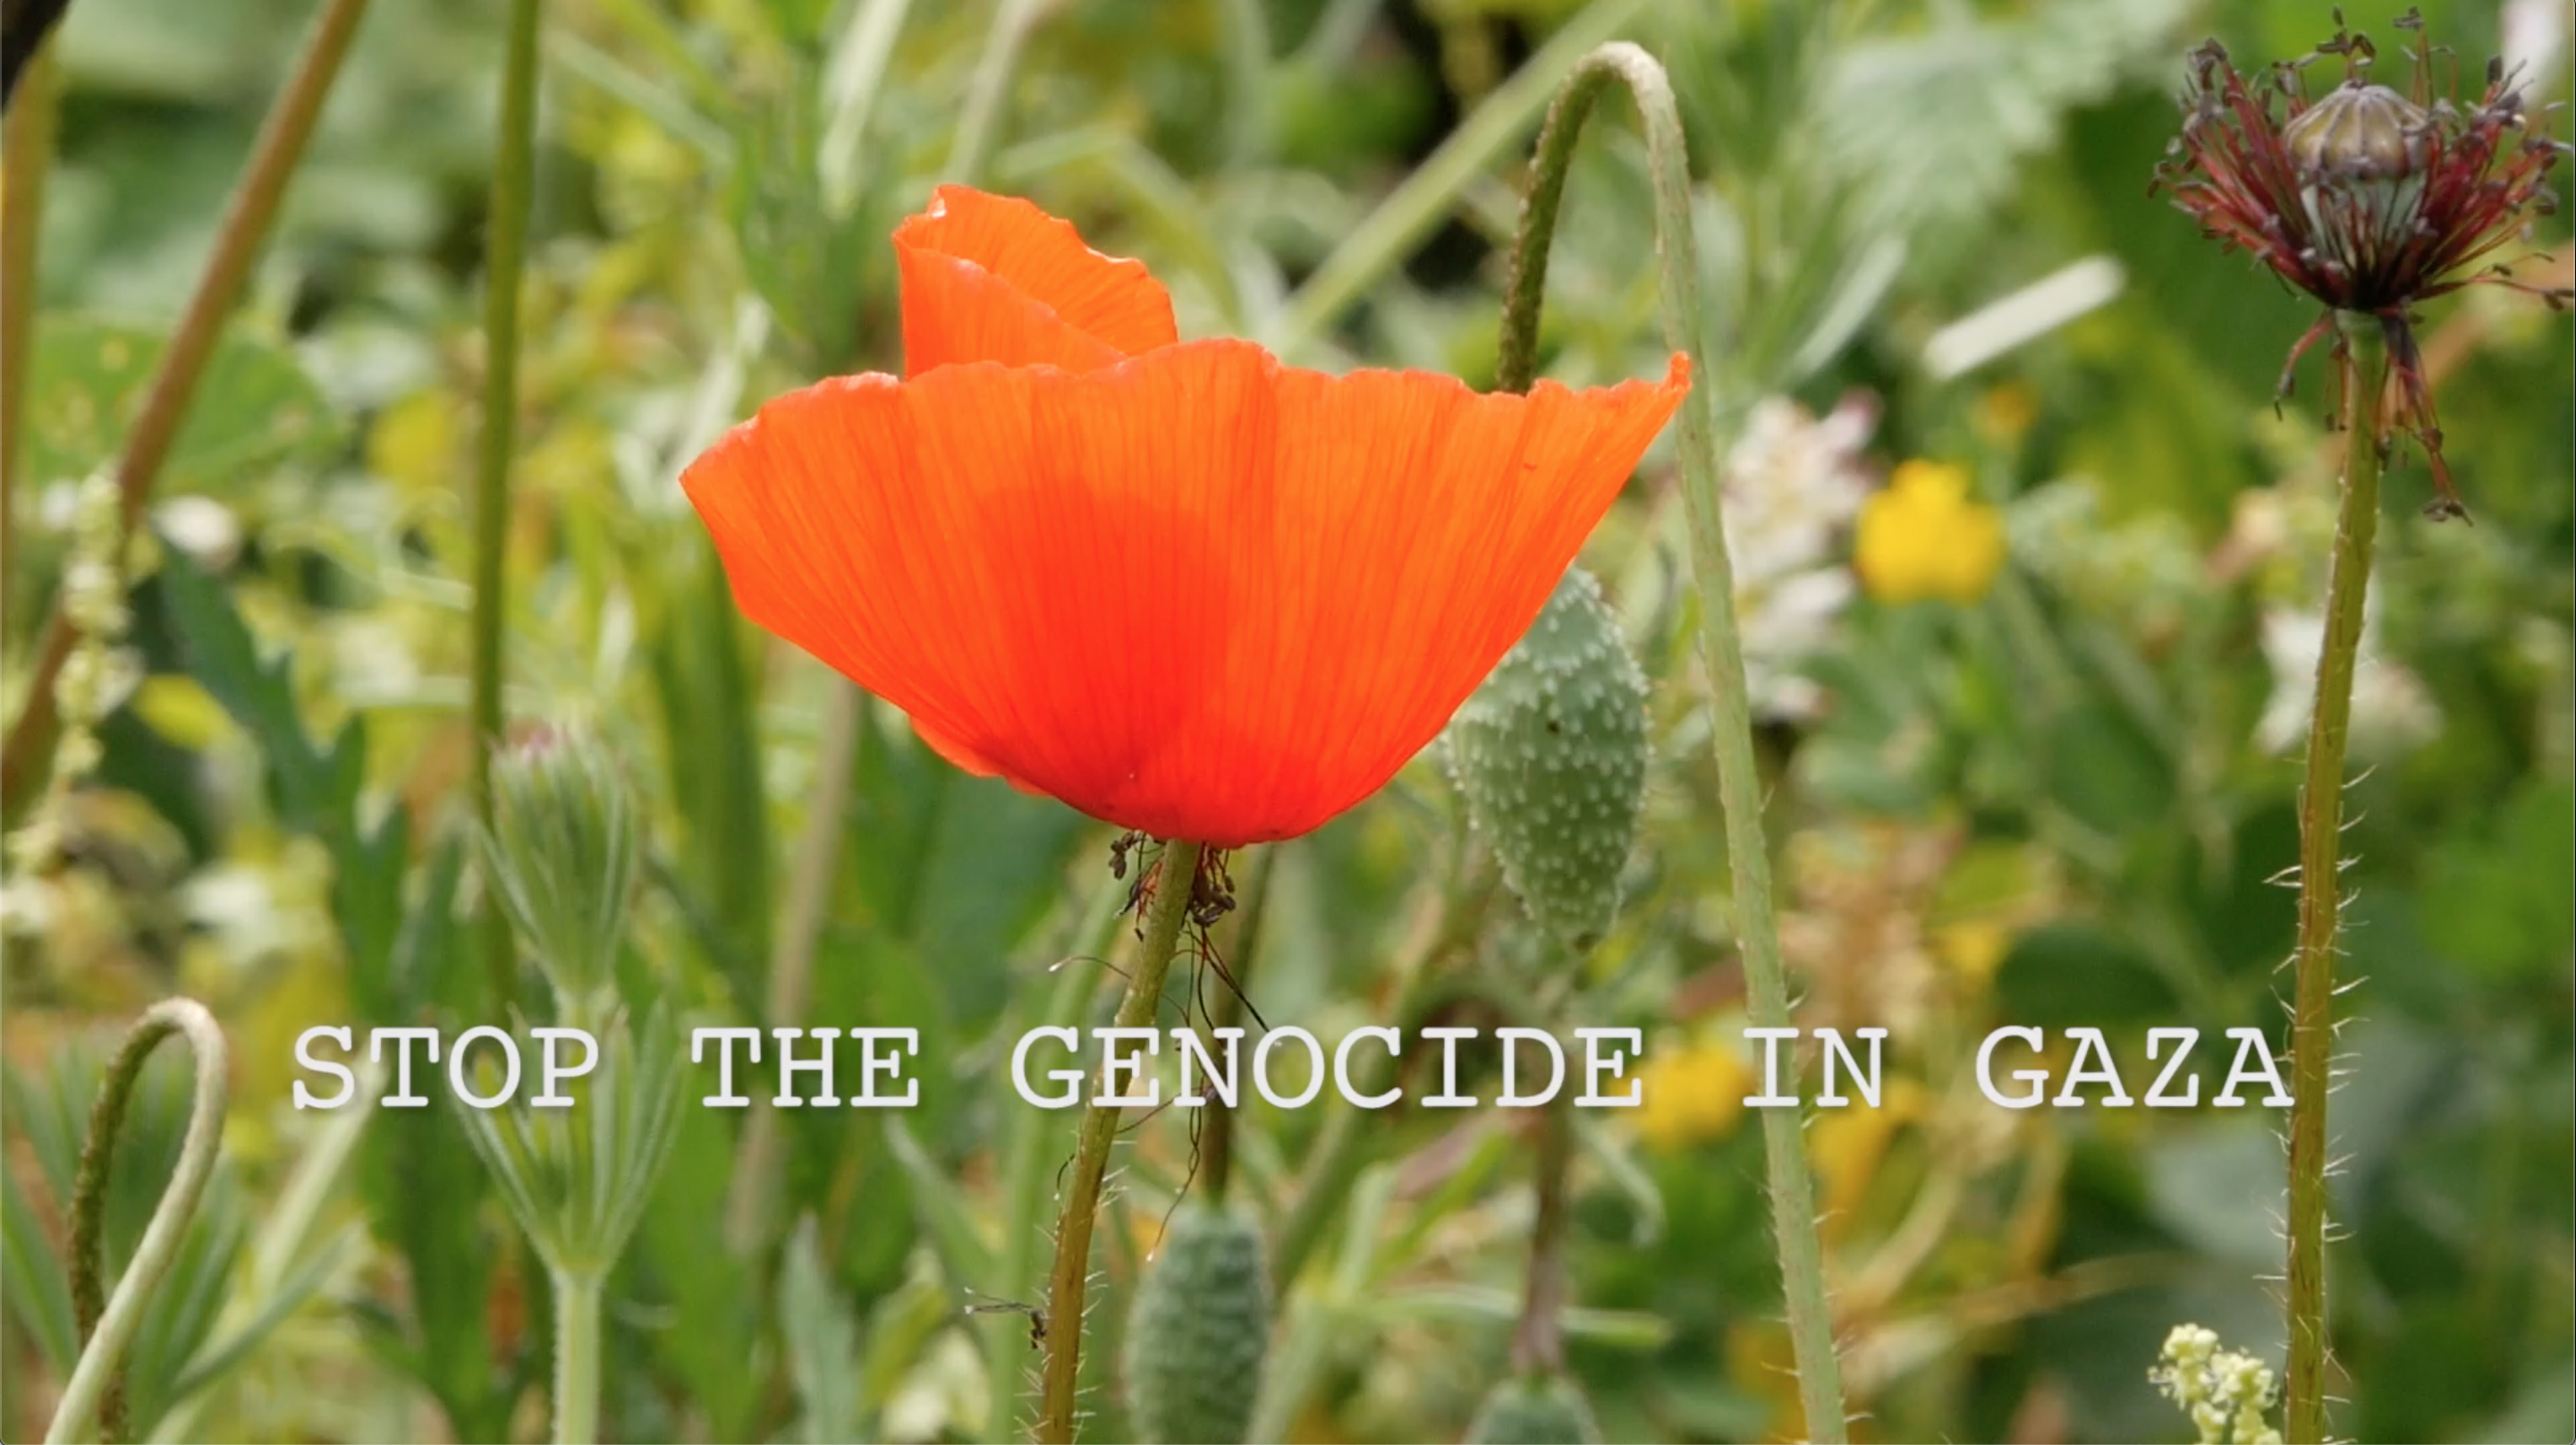 Solidarity video: “Stop the genocide in Gaza” & “Recognizing the Palestinian State”